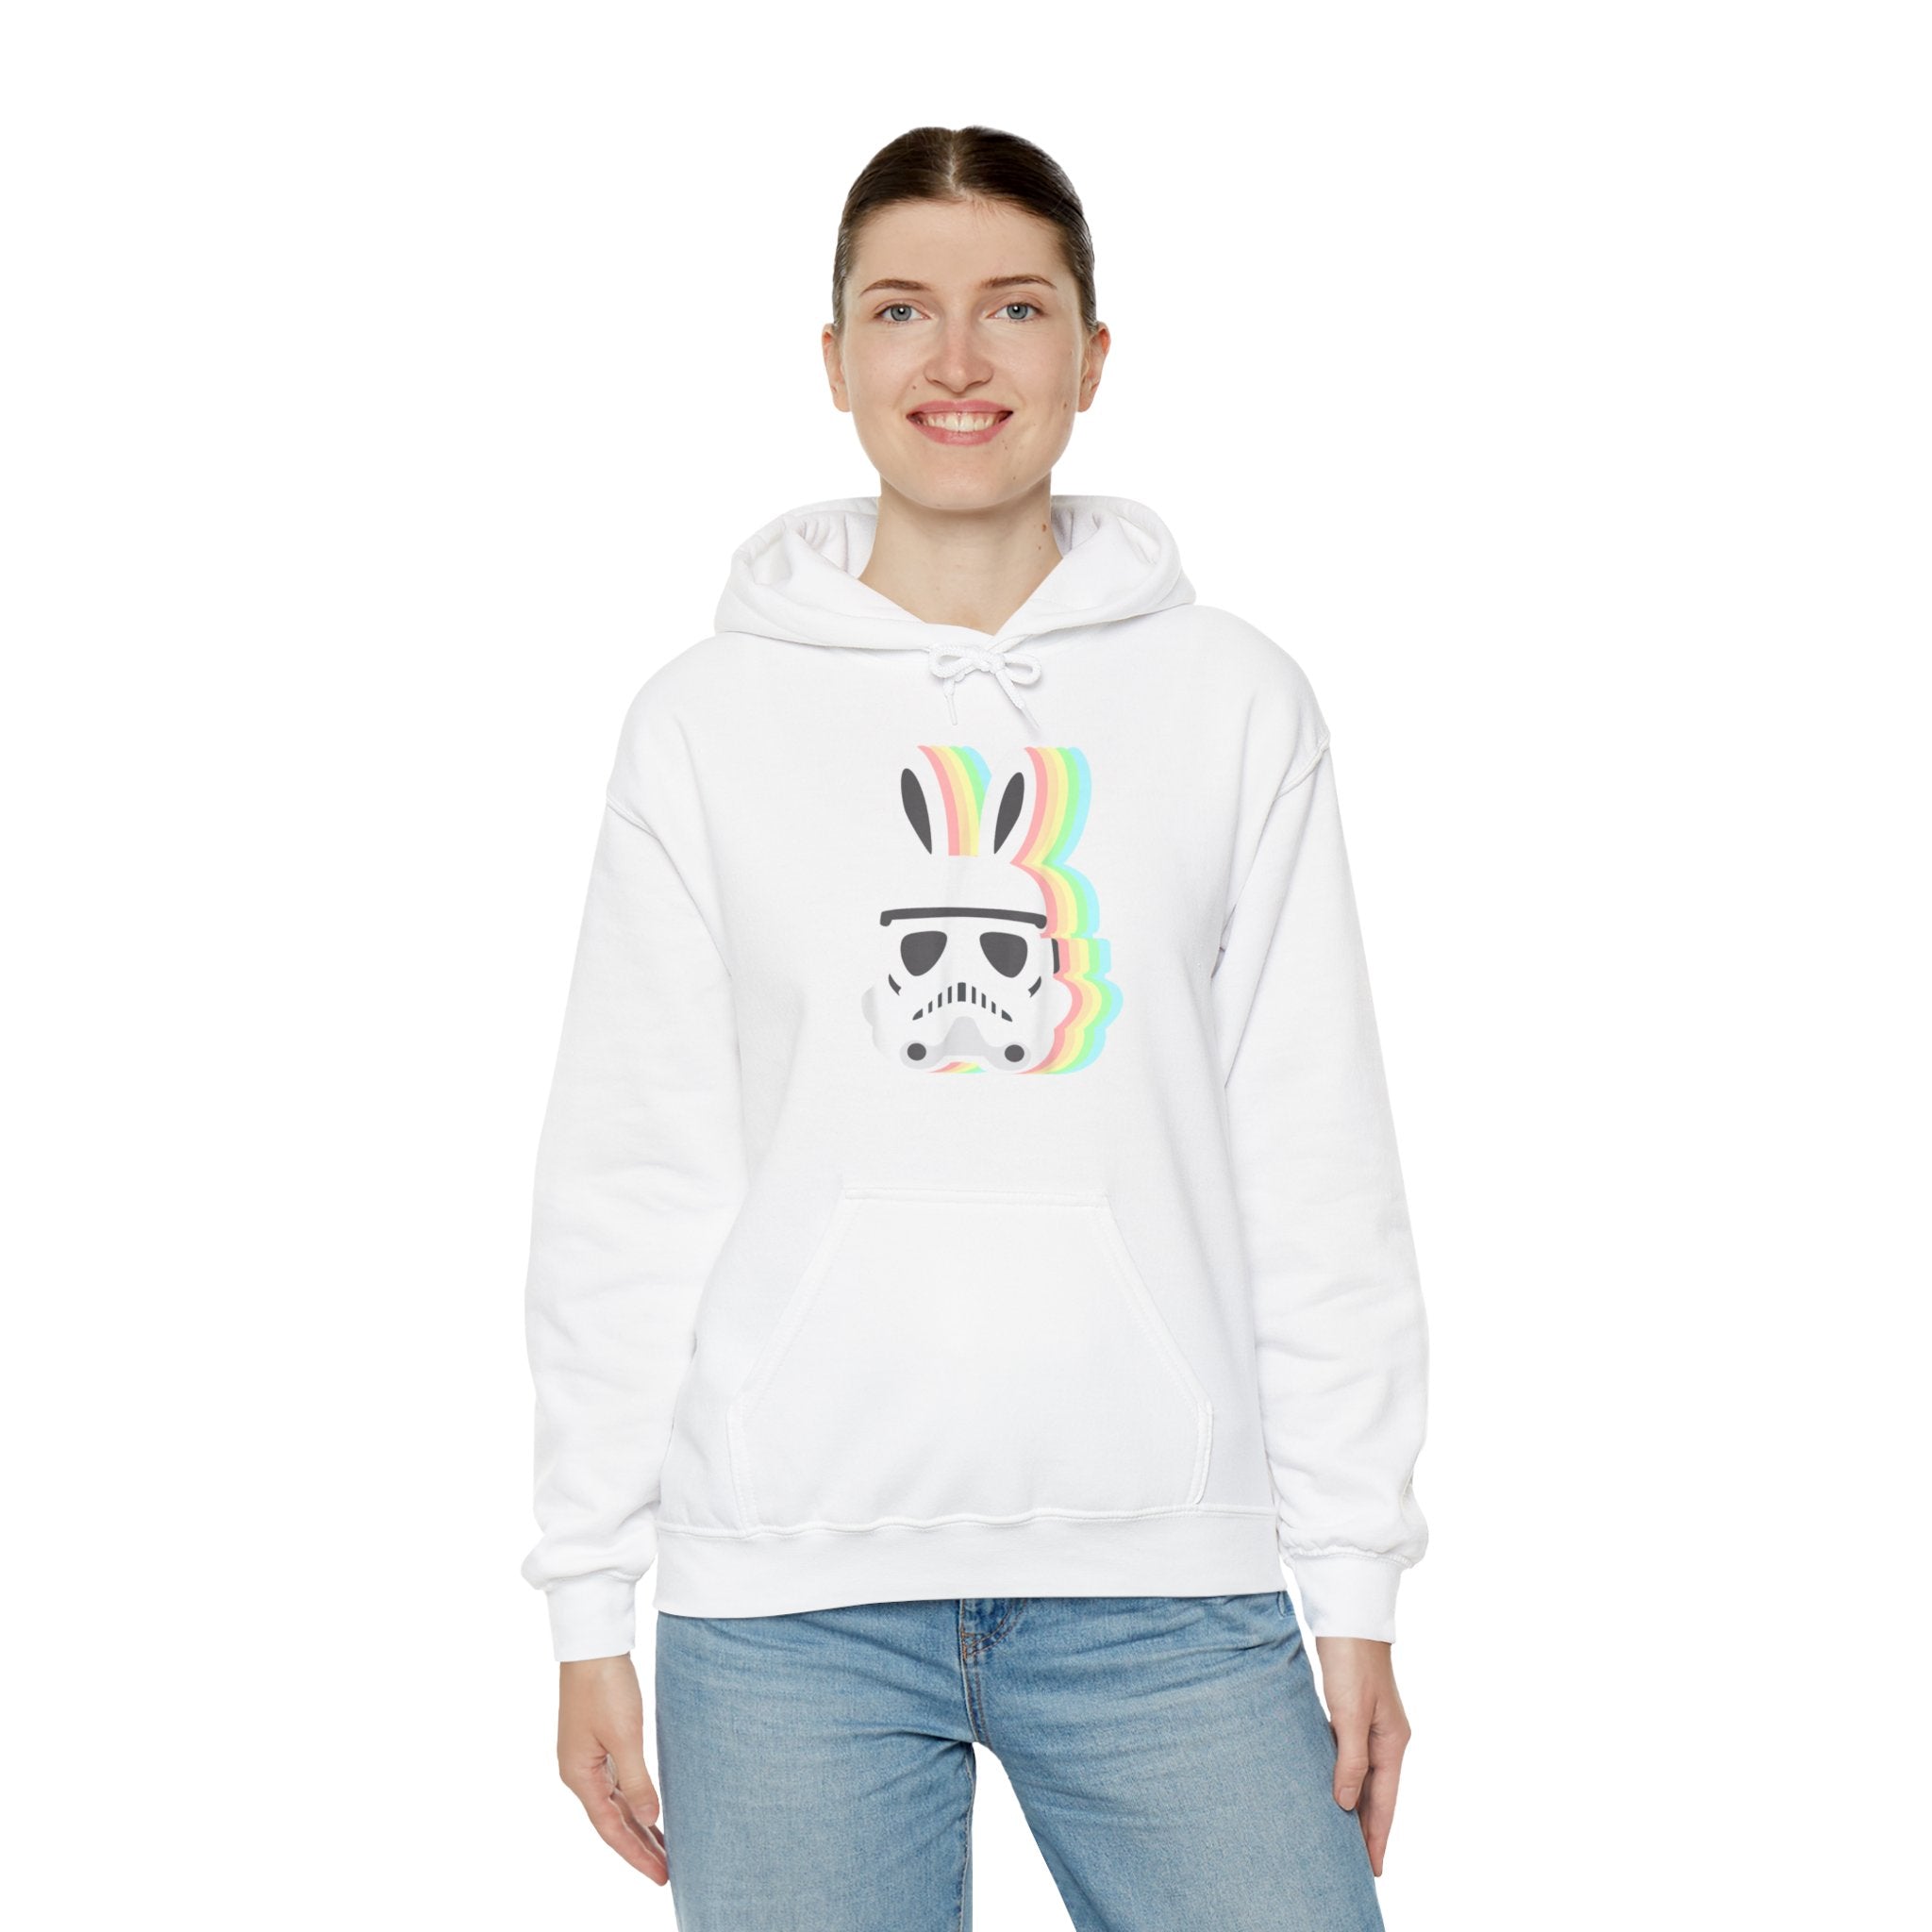 A person with a smile wearing a Star Wars Easter Stormtrooper - Hooded Sweatshirt and blue jeans, shown against a plain white background.